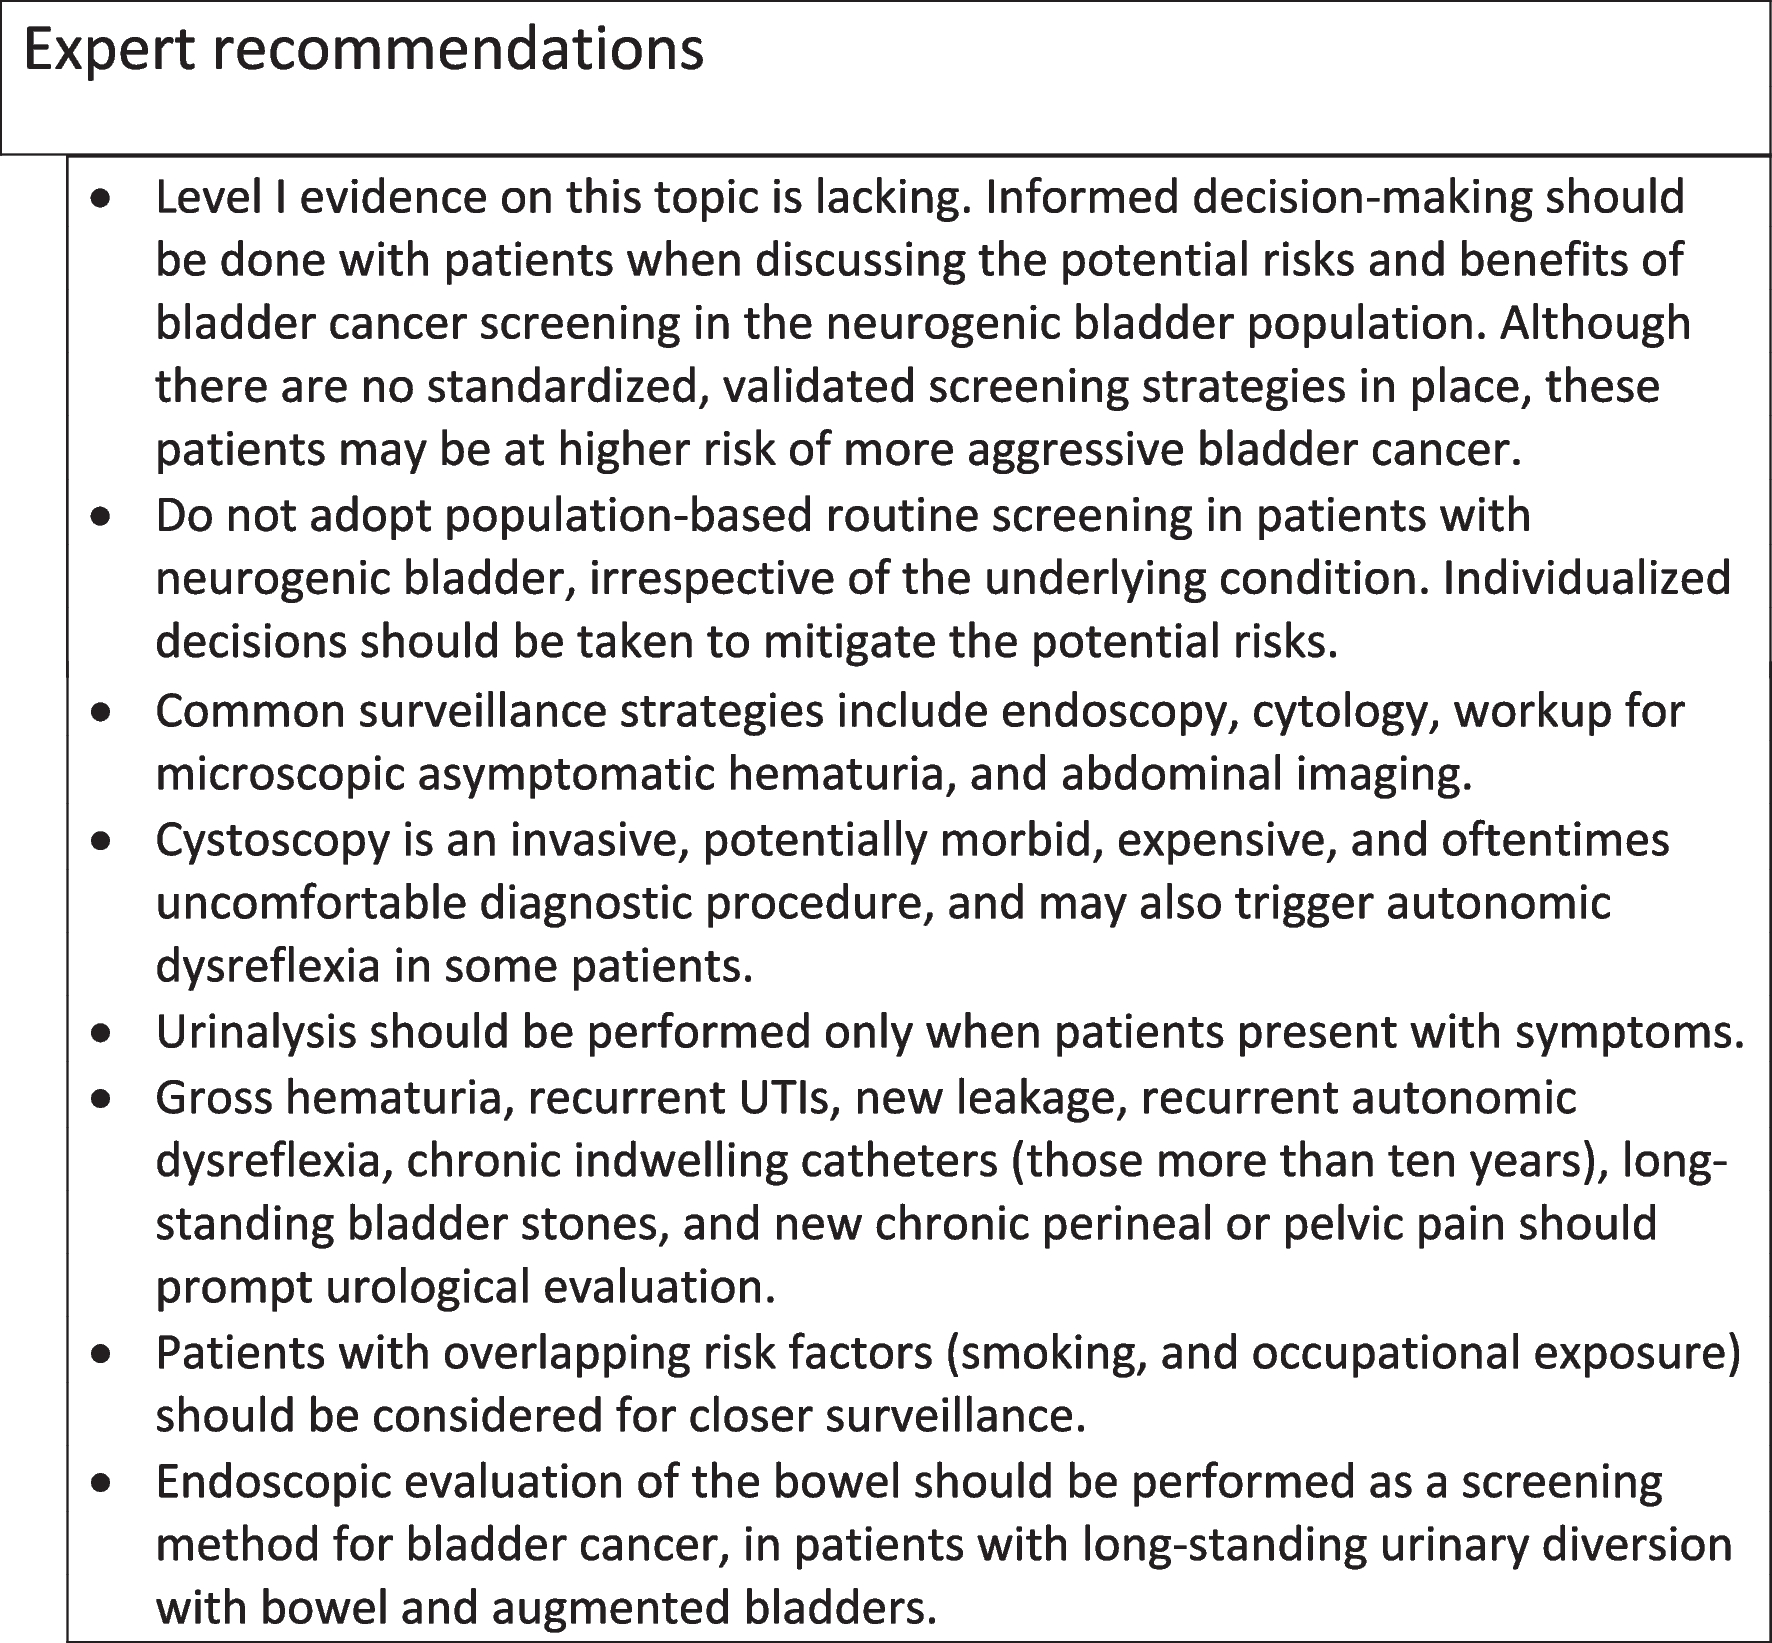 Bladder Cancer Diagnosis and Treatment for Patients with Neurogenic Bladder: Does the Literature Support a Different Approach?